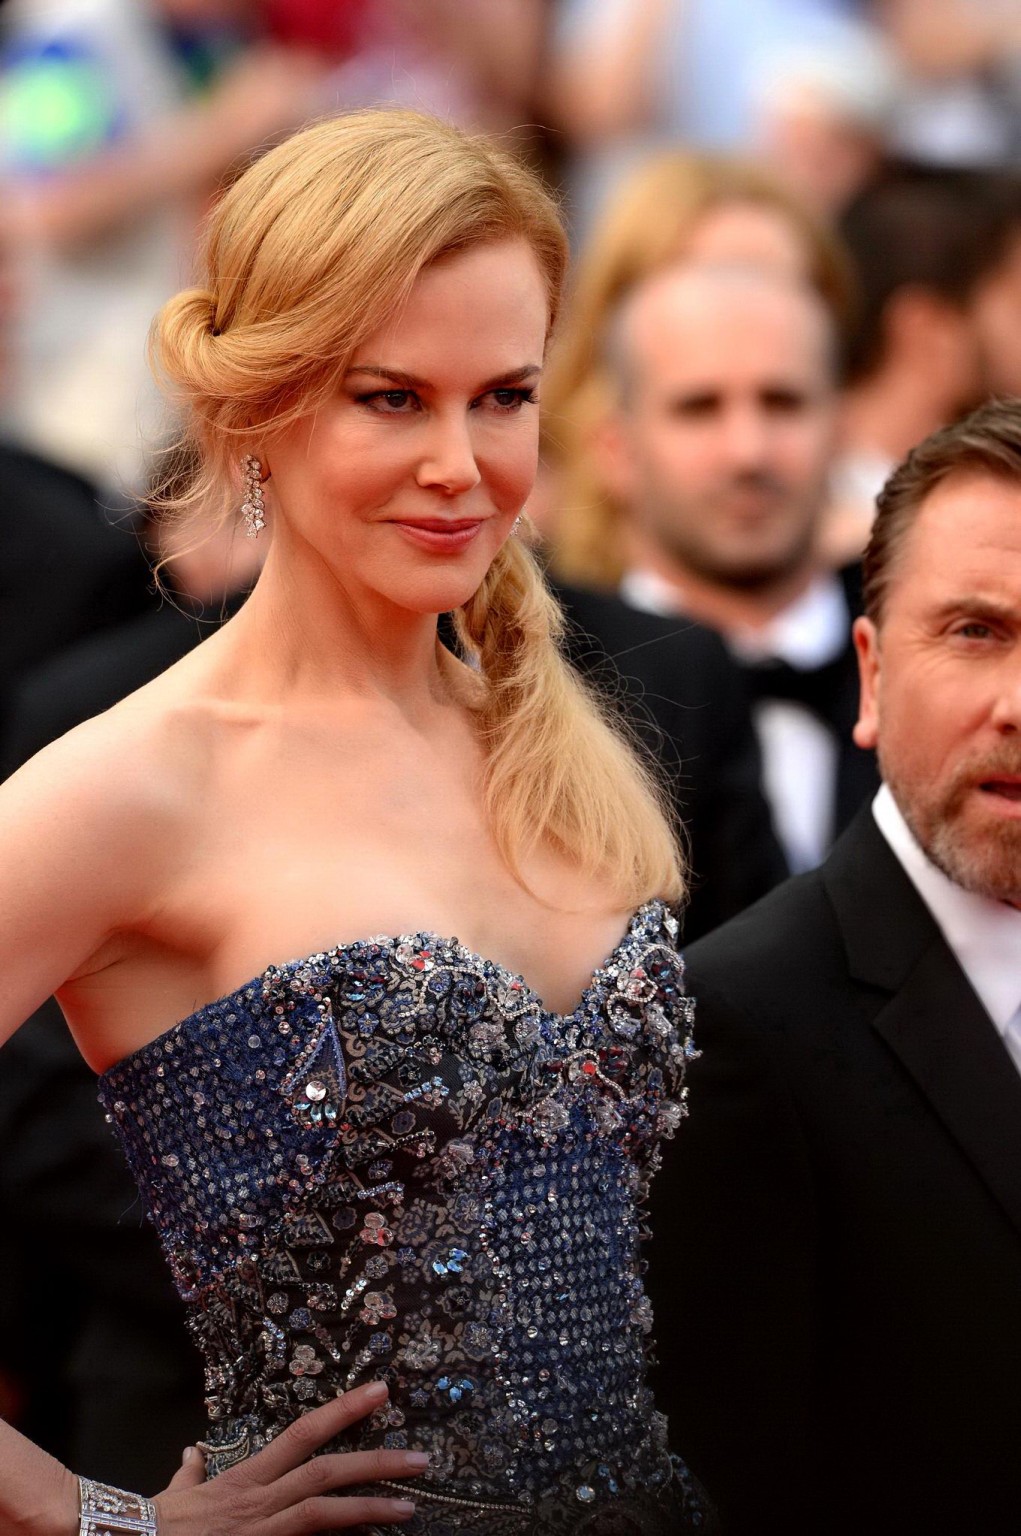 Nicole Kidman busty wearing a strapless dress at the 67th Annual Cannes Film Fes #75196243